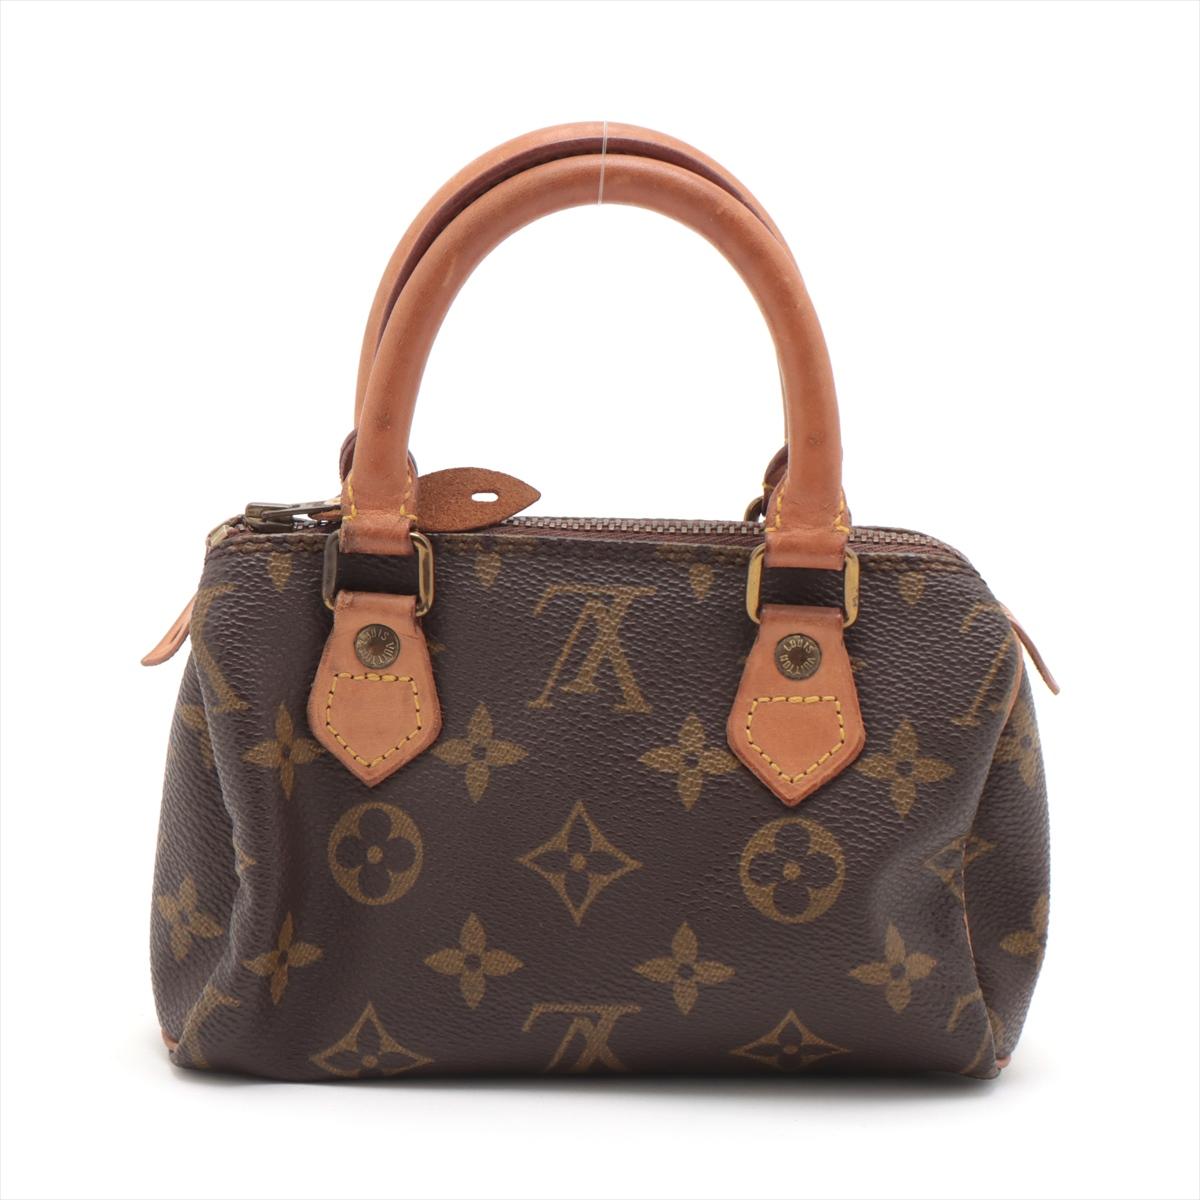 Louis Vuitton Monogram Mini Speedy In Good Condition For Sale In Indianapolis, IN